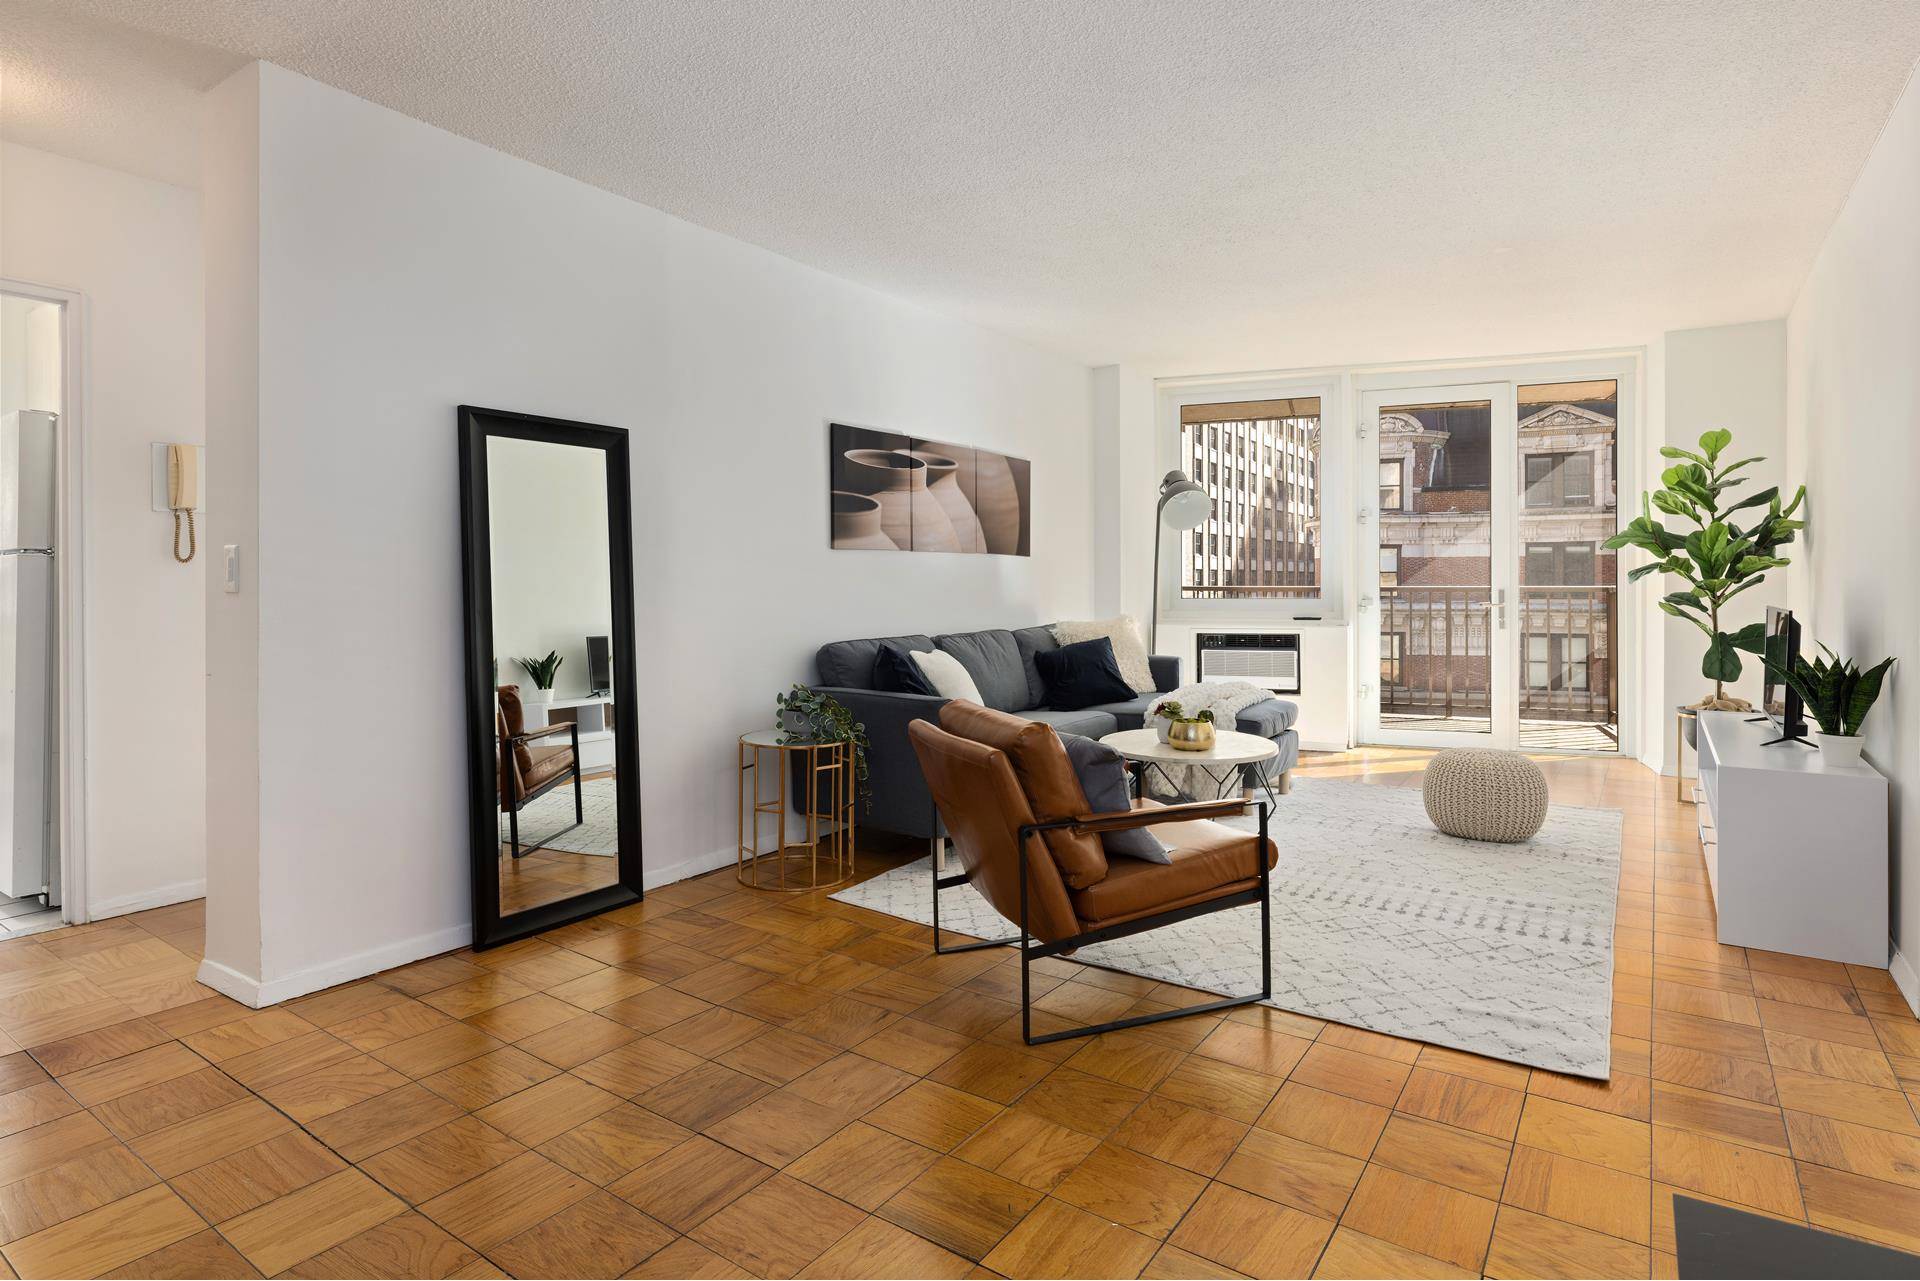 Very spacious three bedroom two bathroom with PRIVATE BALCONY located in La Premiere ; a full service luxury building in Midtown West.